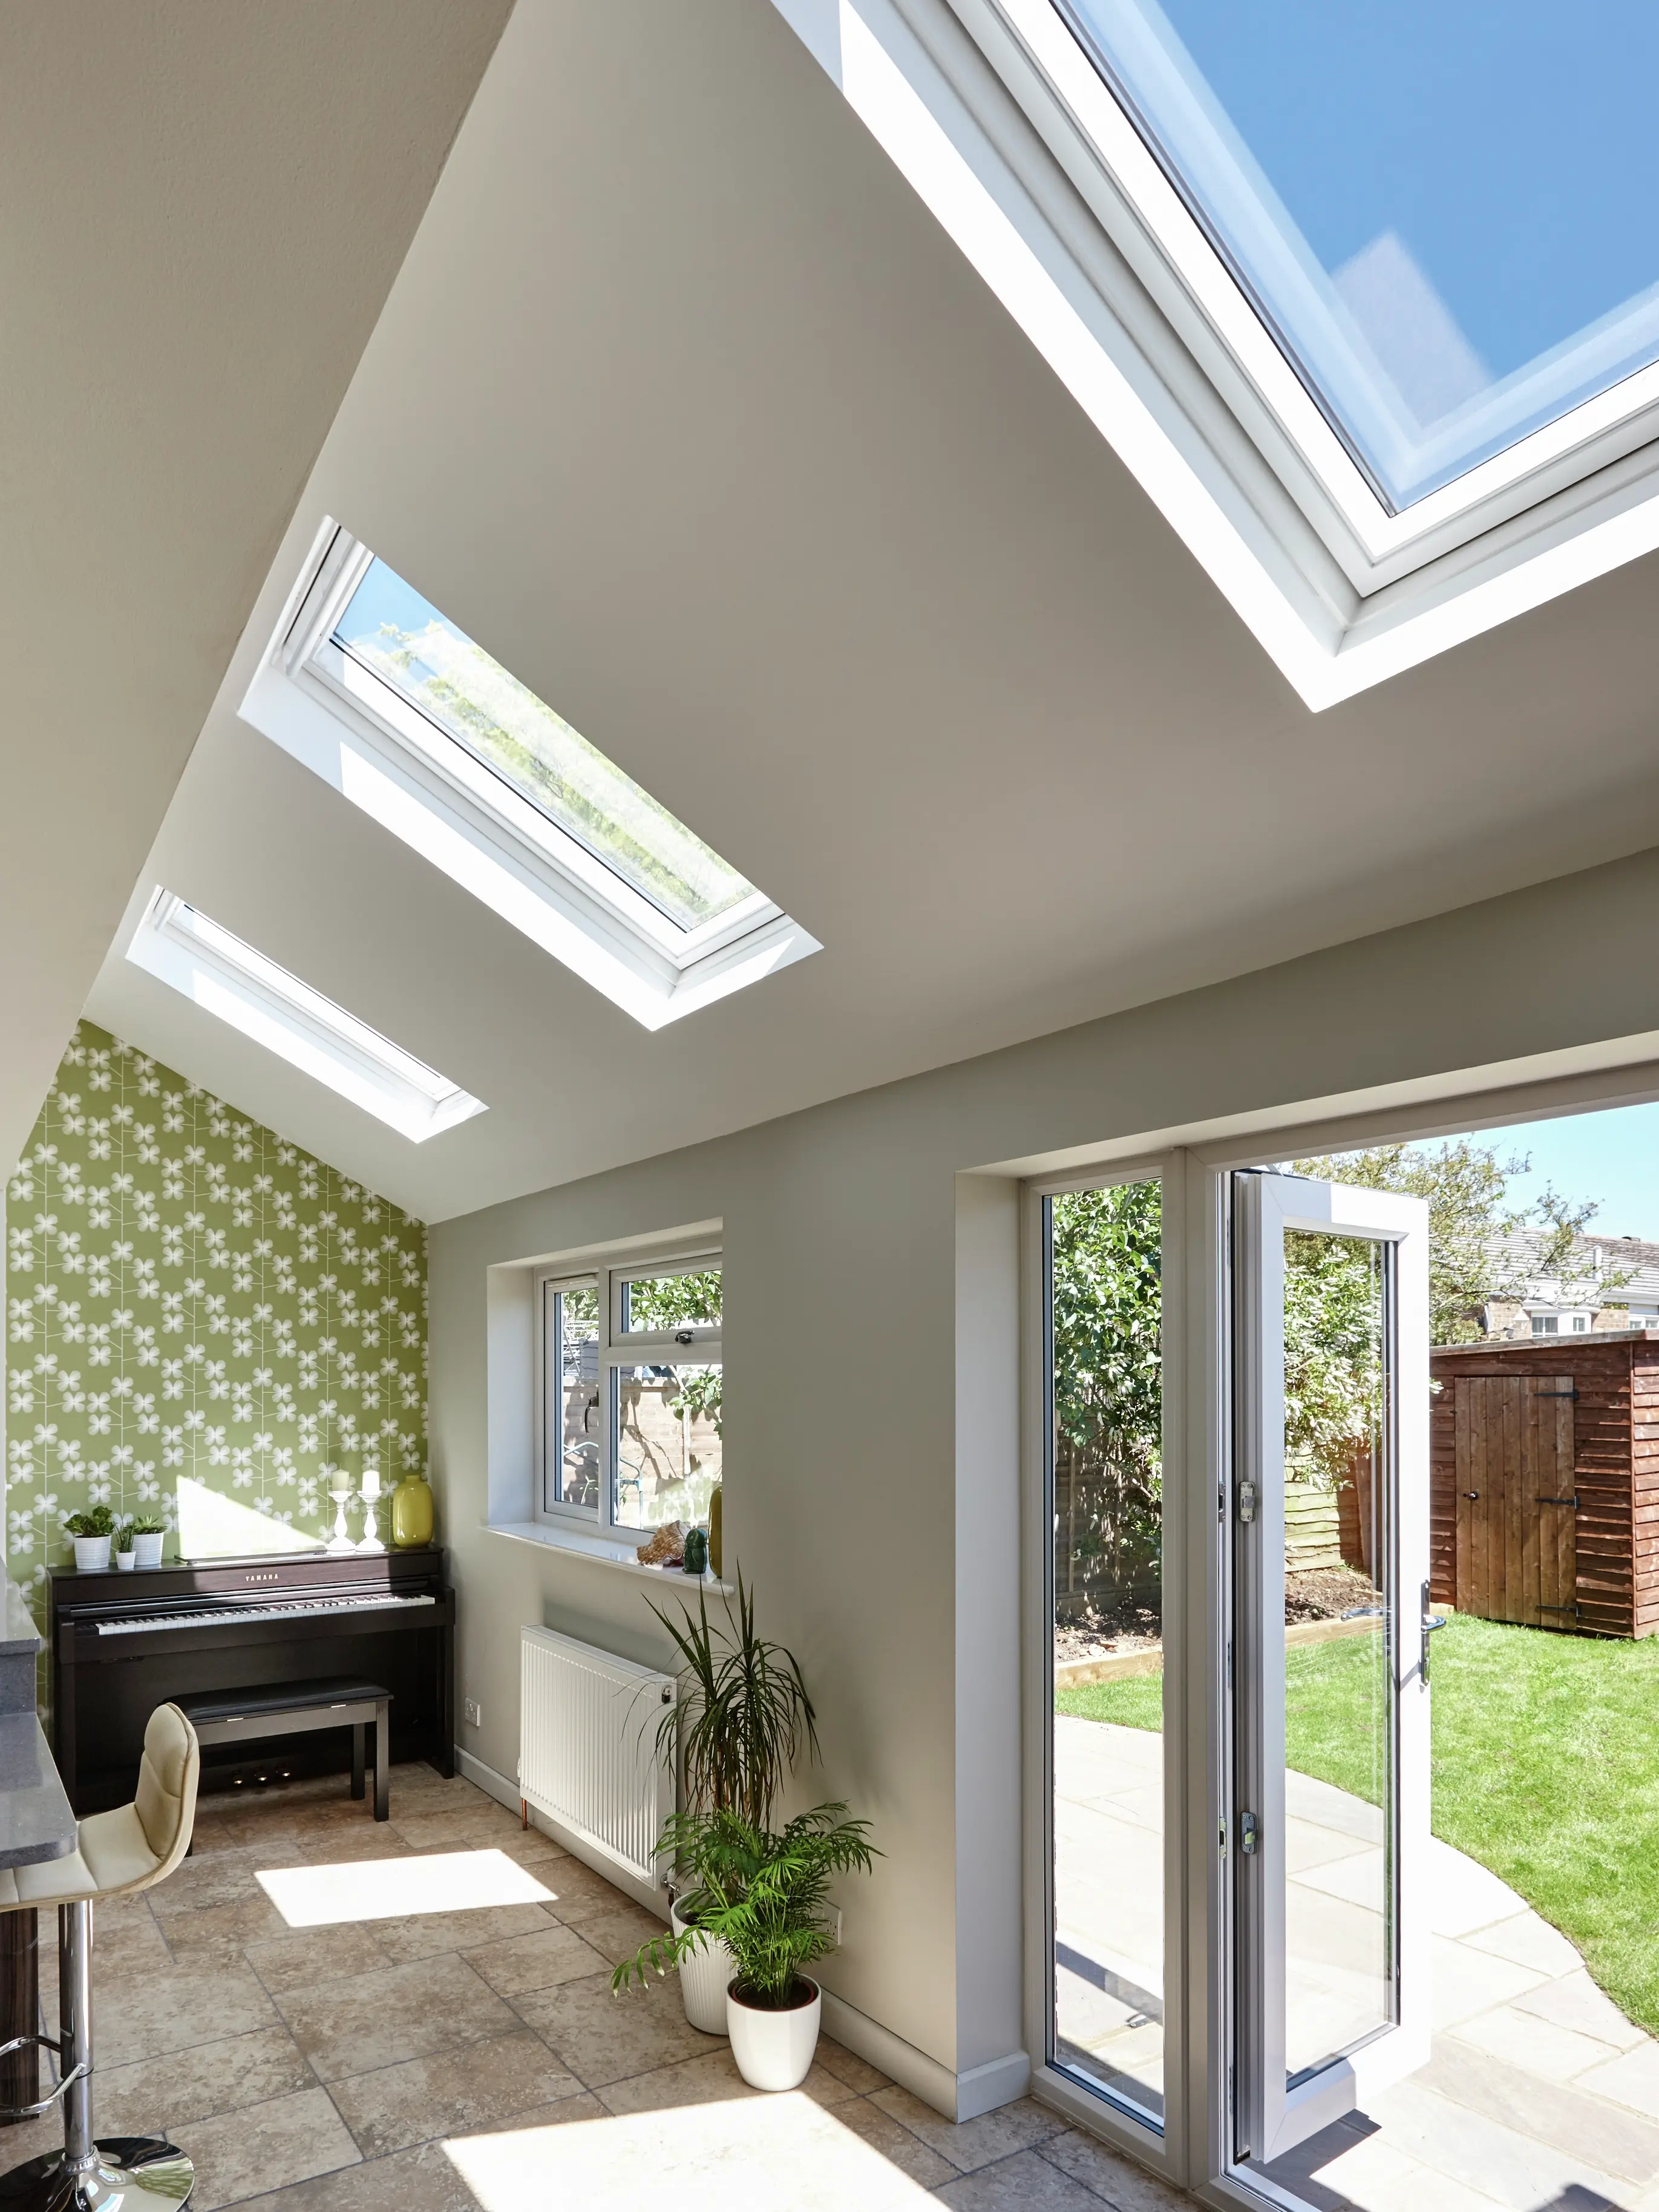 Home office with VELUX roof windows, piano, and open French doors to garden.